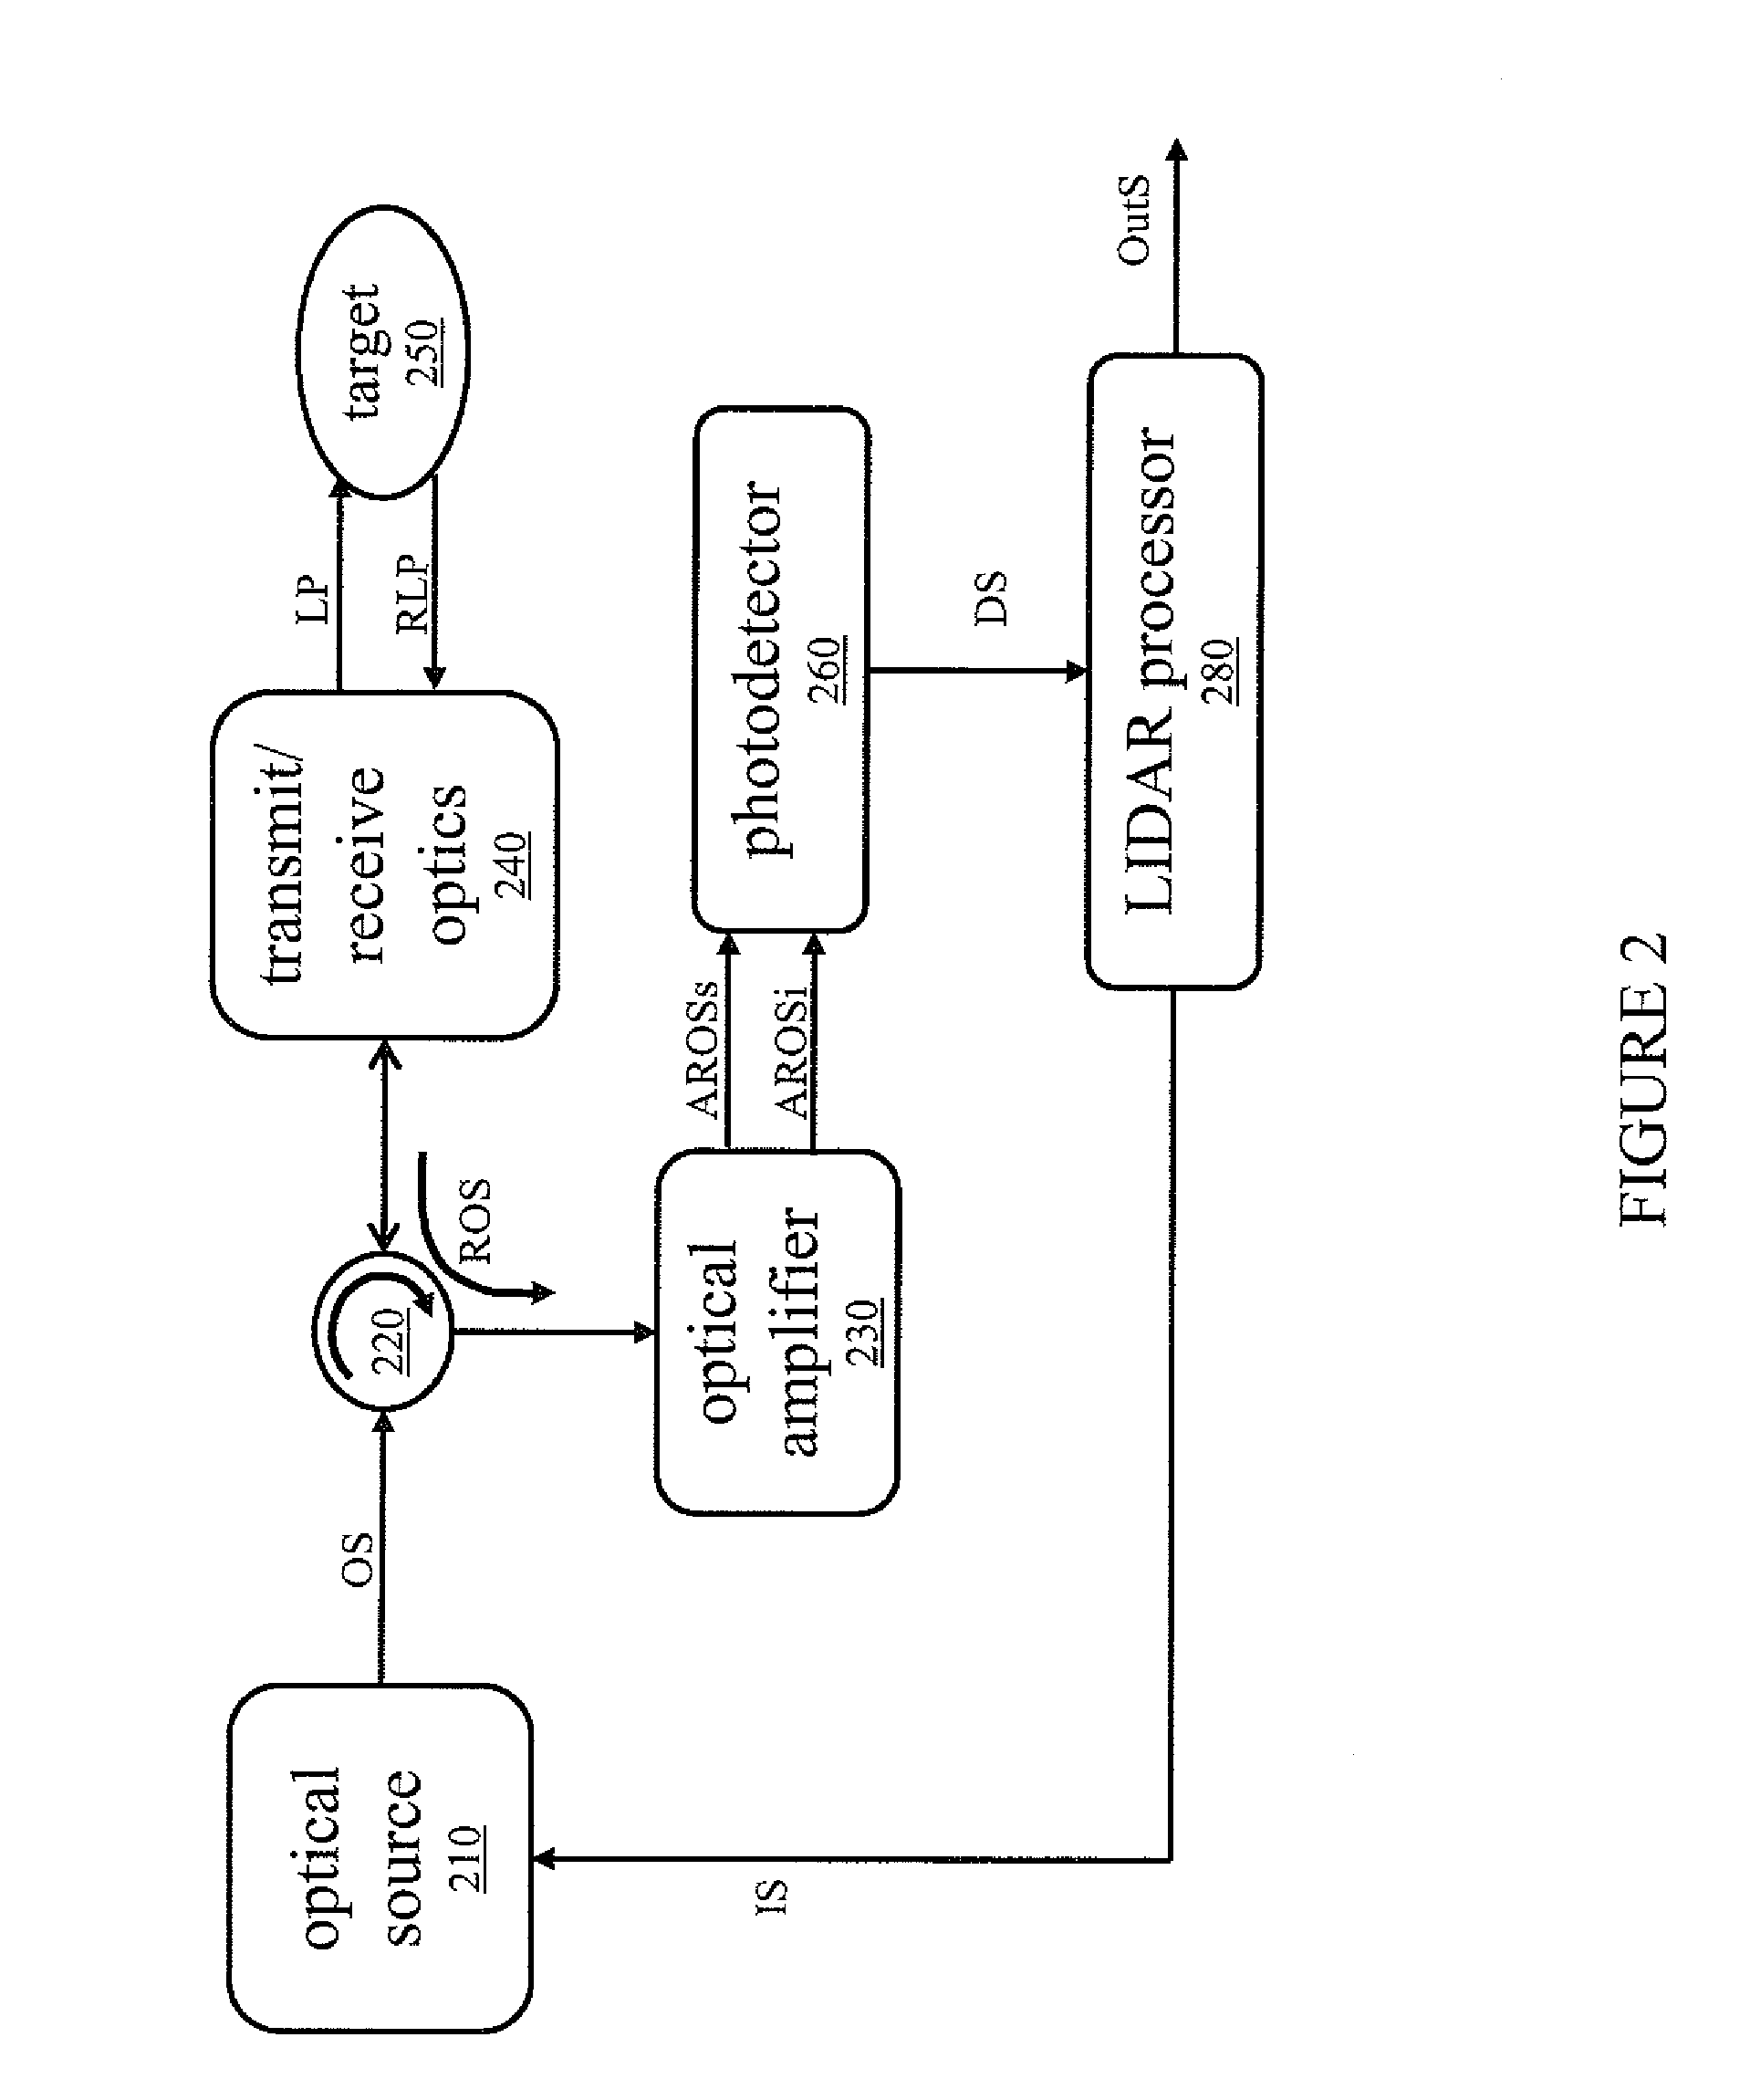 System and method for nonlinear optical devices